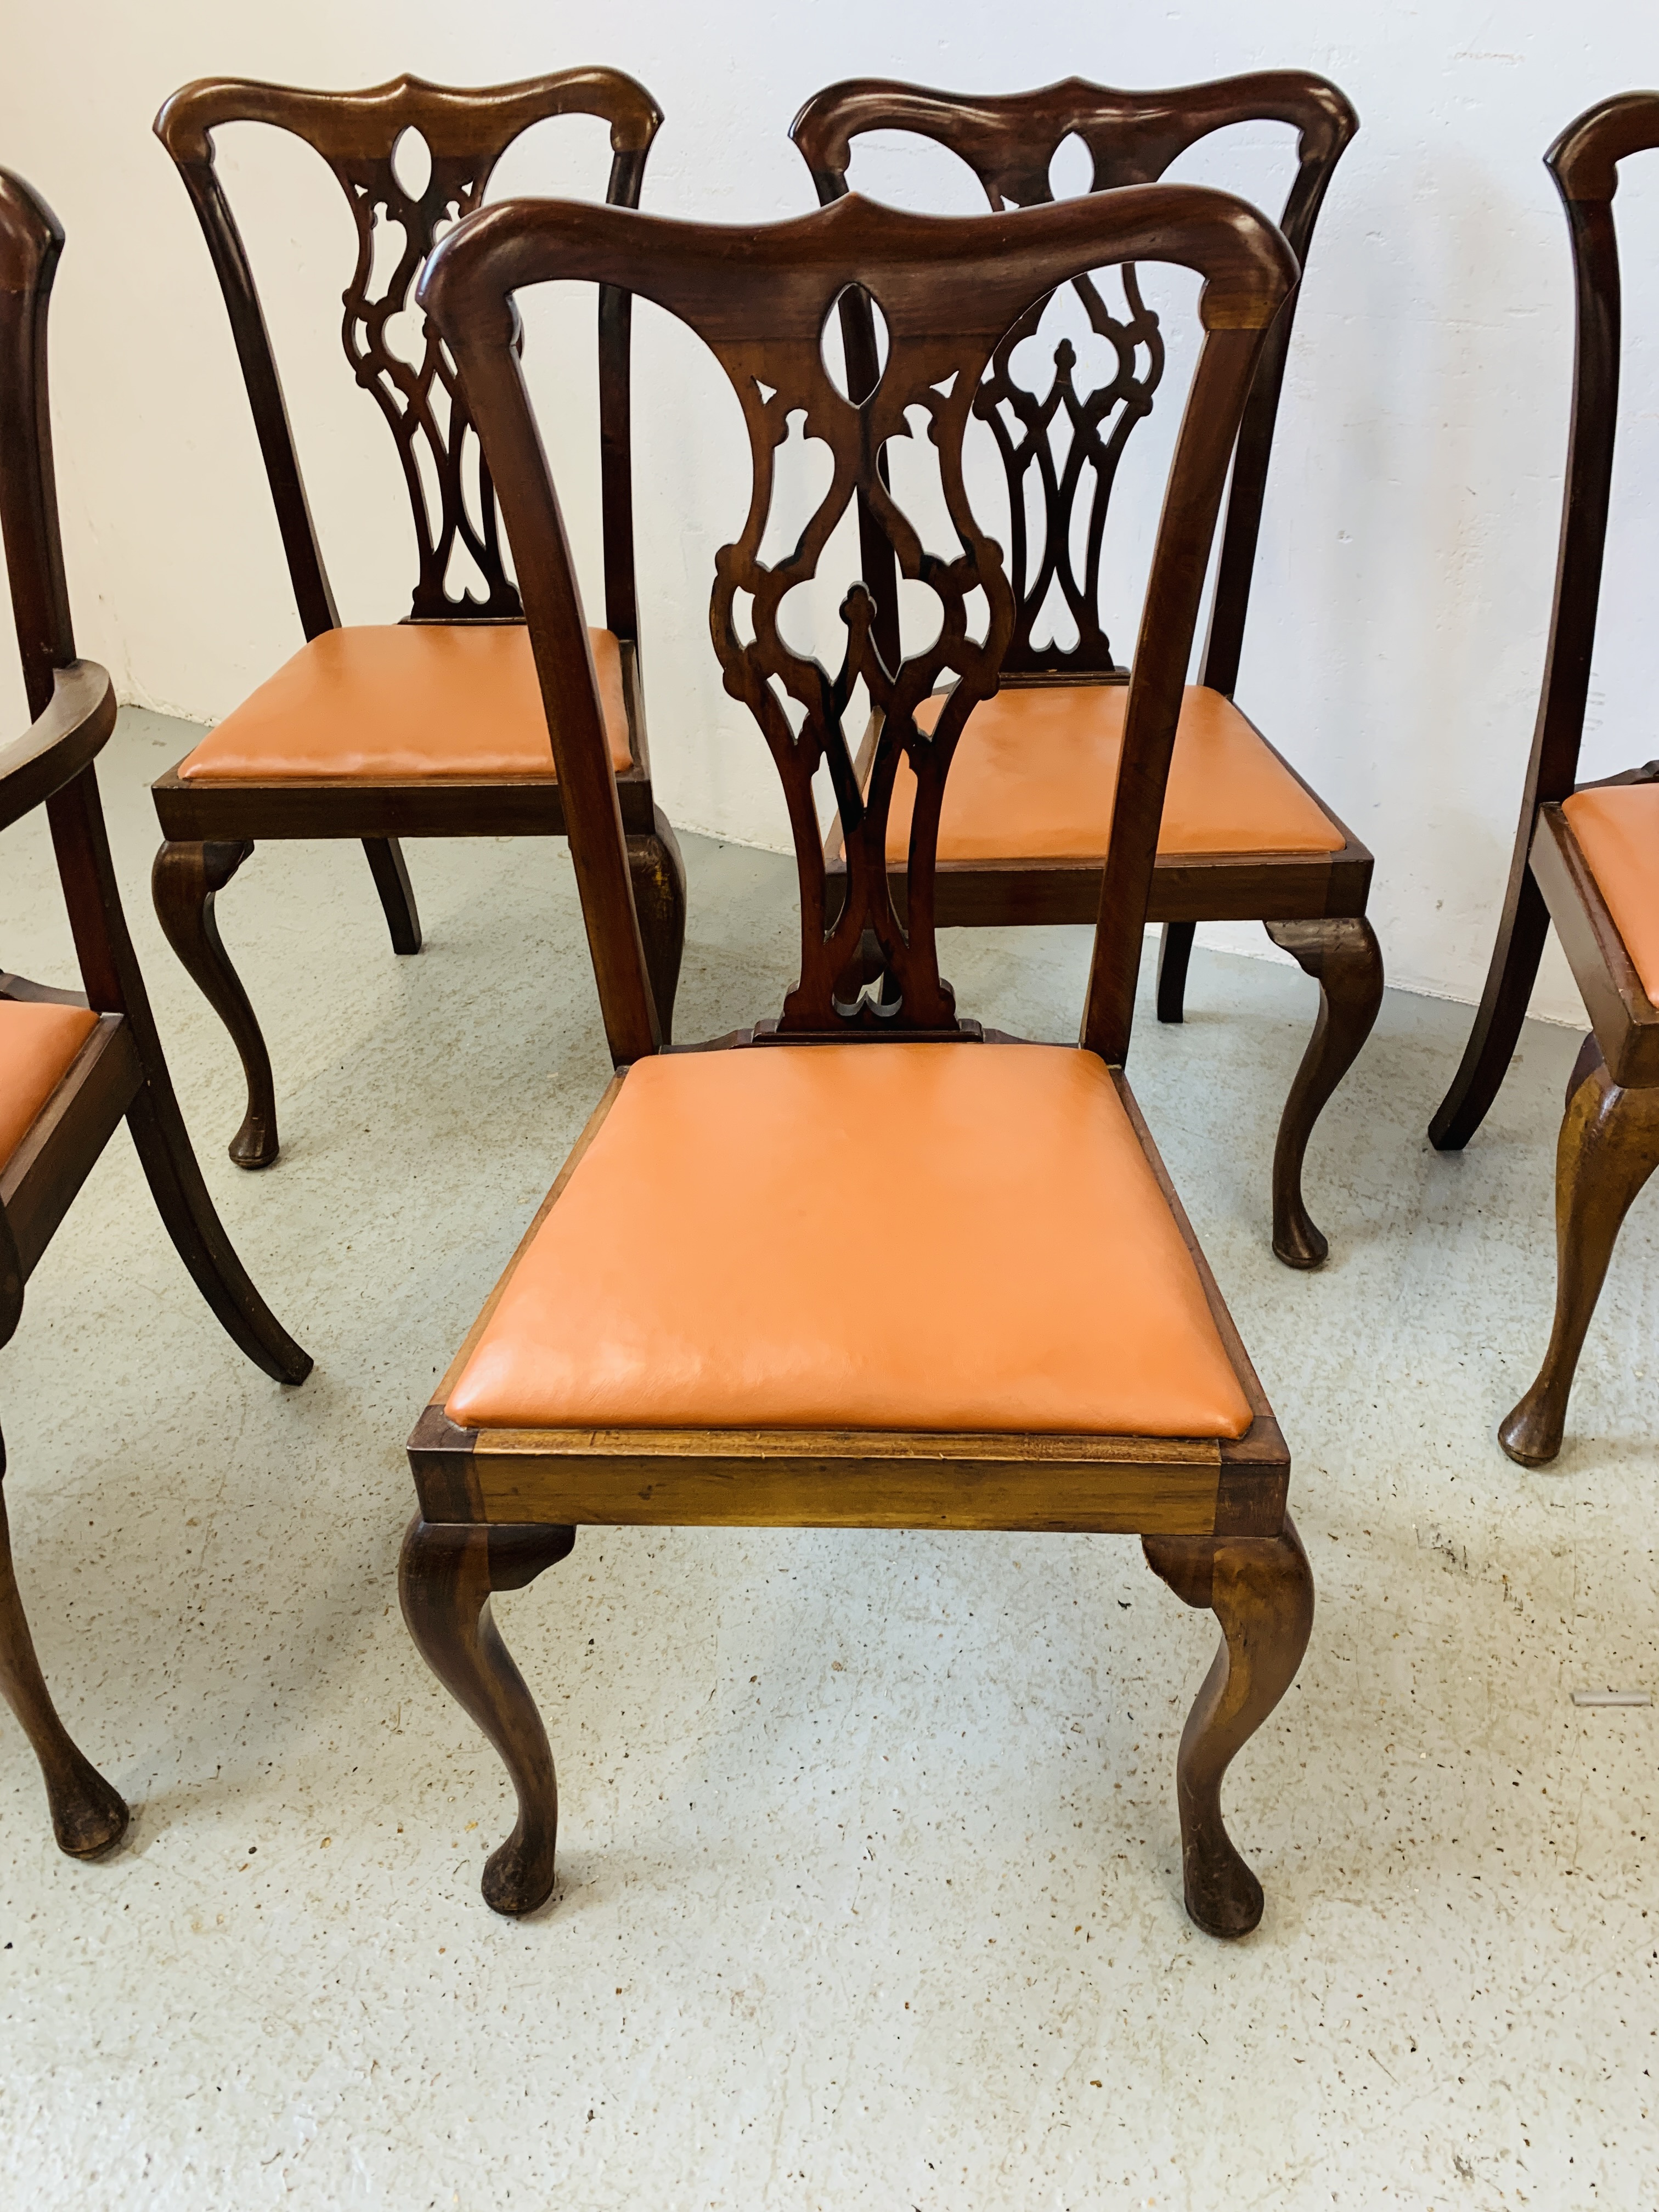 SET OF 6 MAHOGANY DINING CHAIRS (4 SIDE, 2 CARVER) WITH LEATHERETTE DROP IN SEATS, QUEEN ANN LEG, - Image 3 of 8